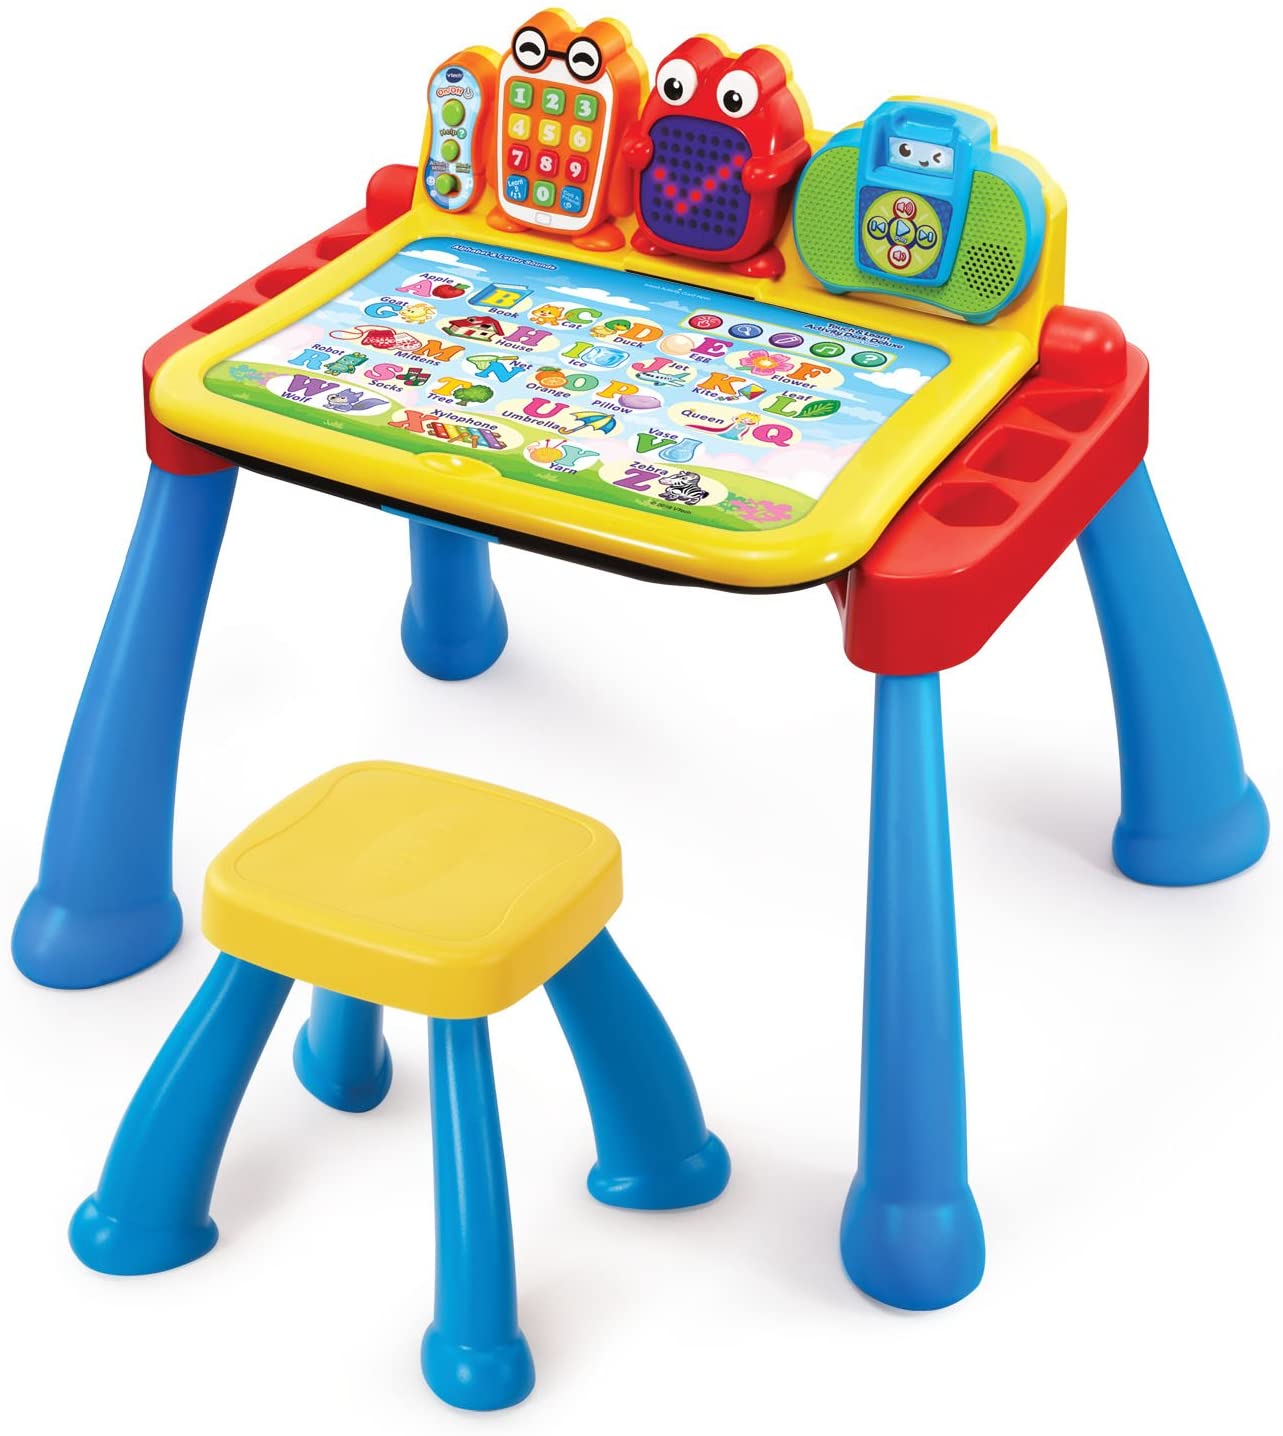 VTech 3-In-1 Electronic Activity Desk Educational Toy